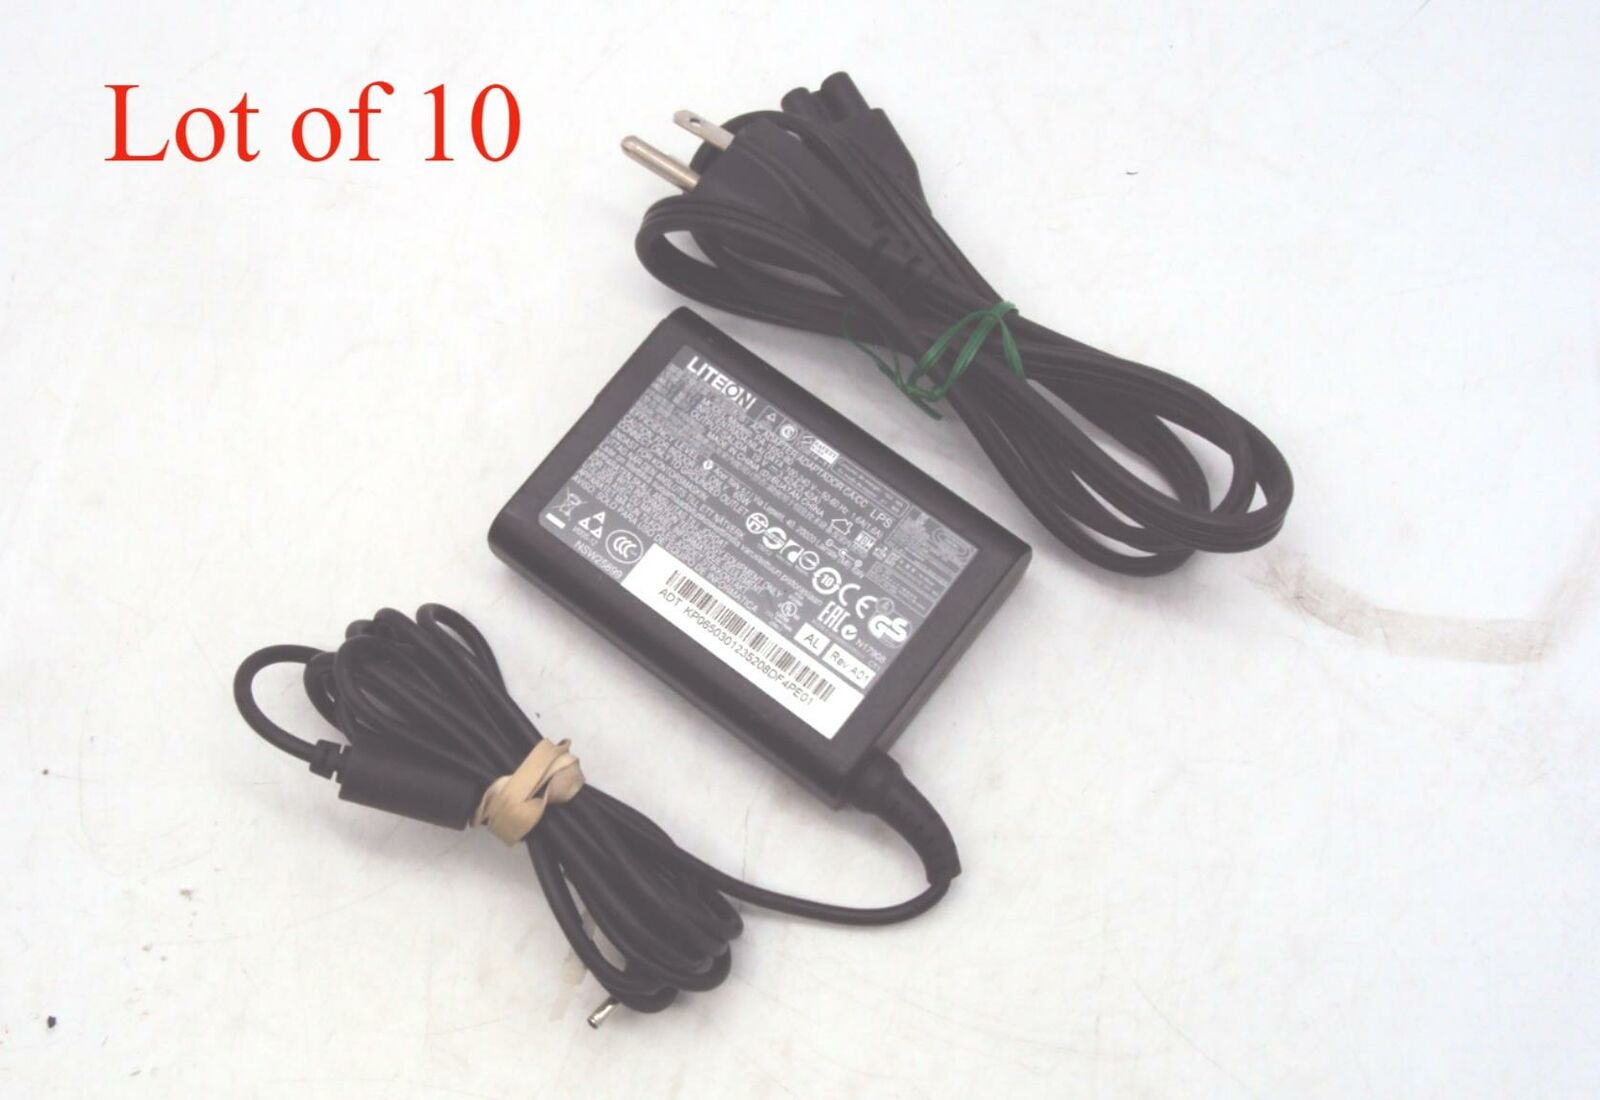 Lot of 10 LITEON PA-1650-80 19V 3.42A Acer Chromebook Power Supply Adapter 3/1.1